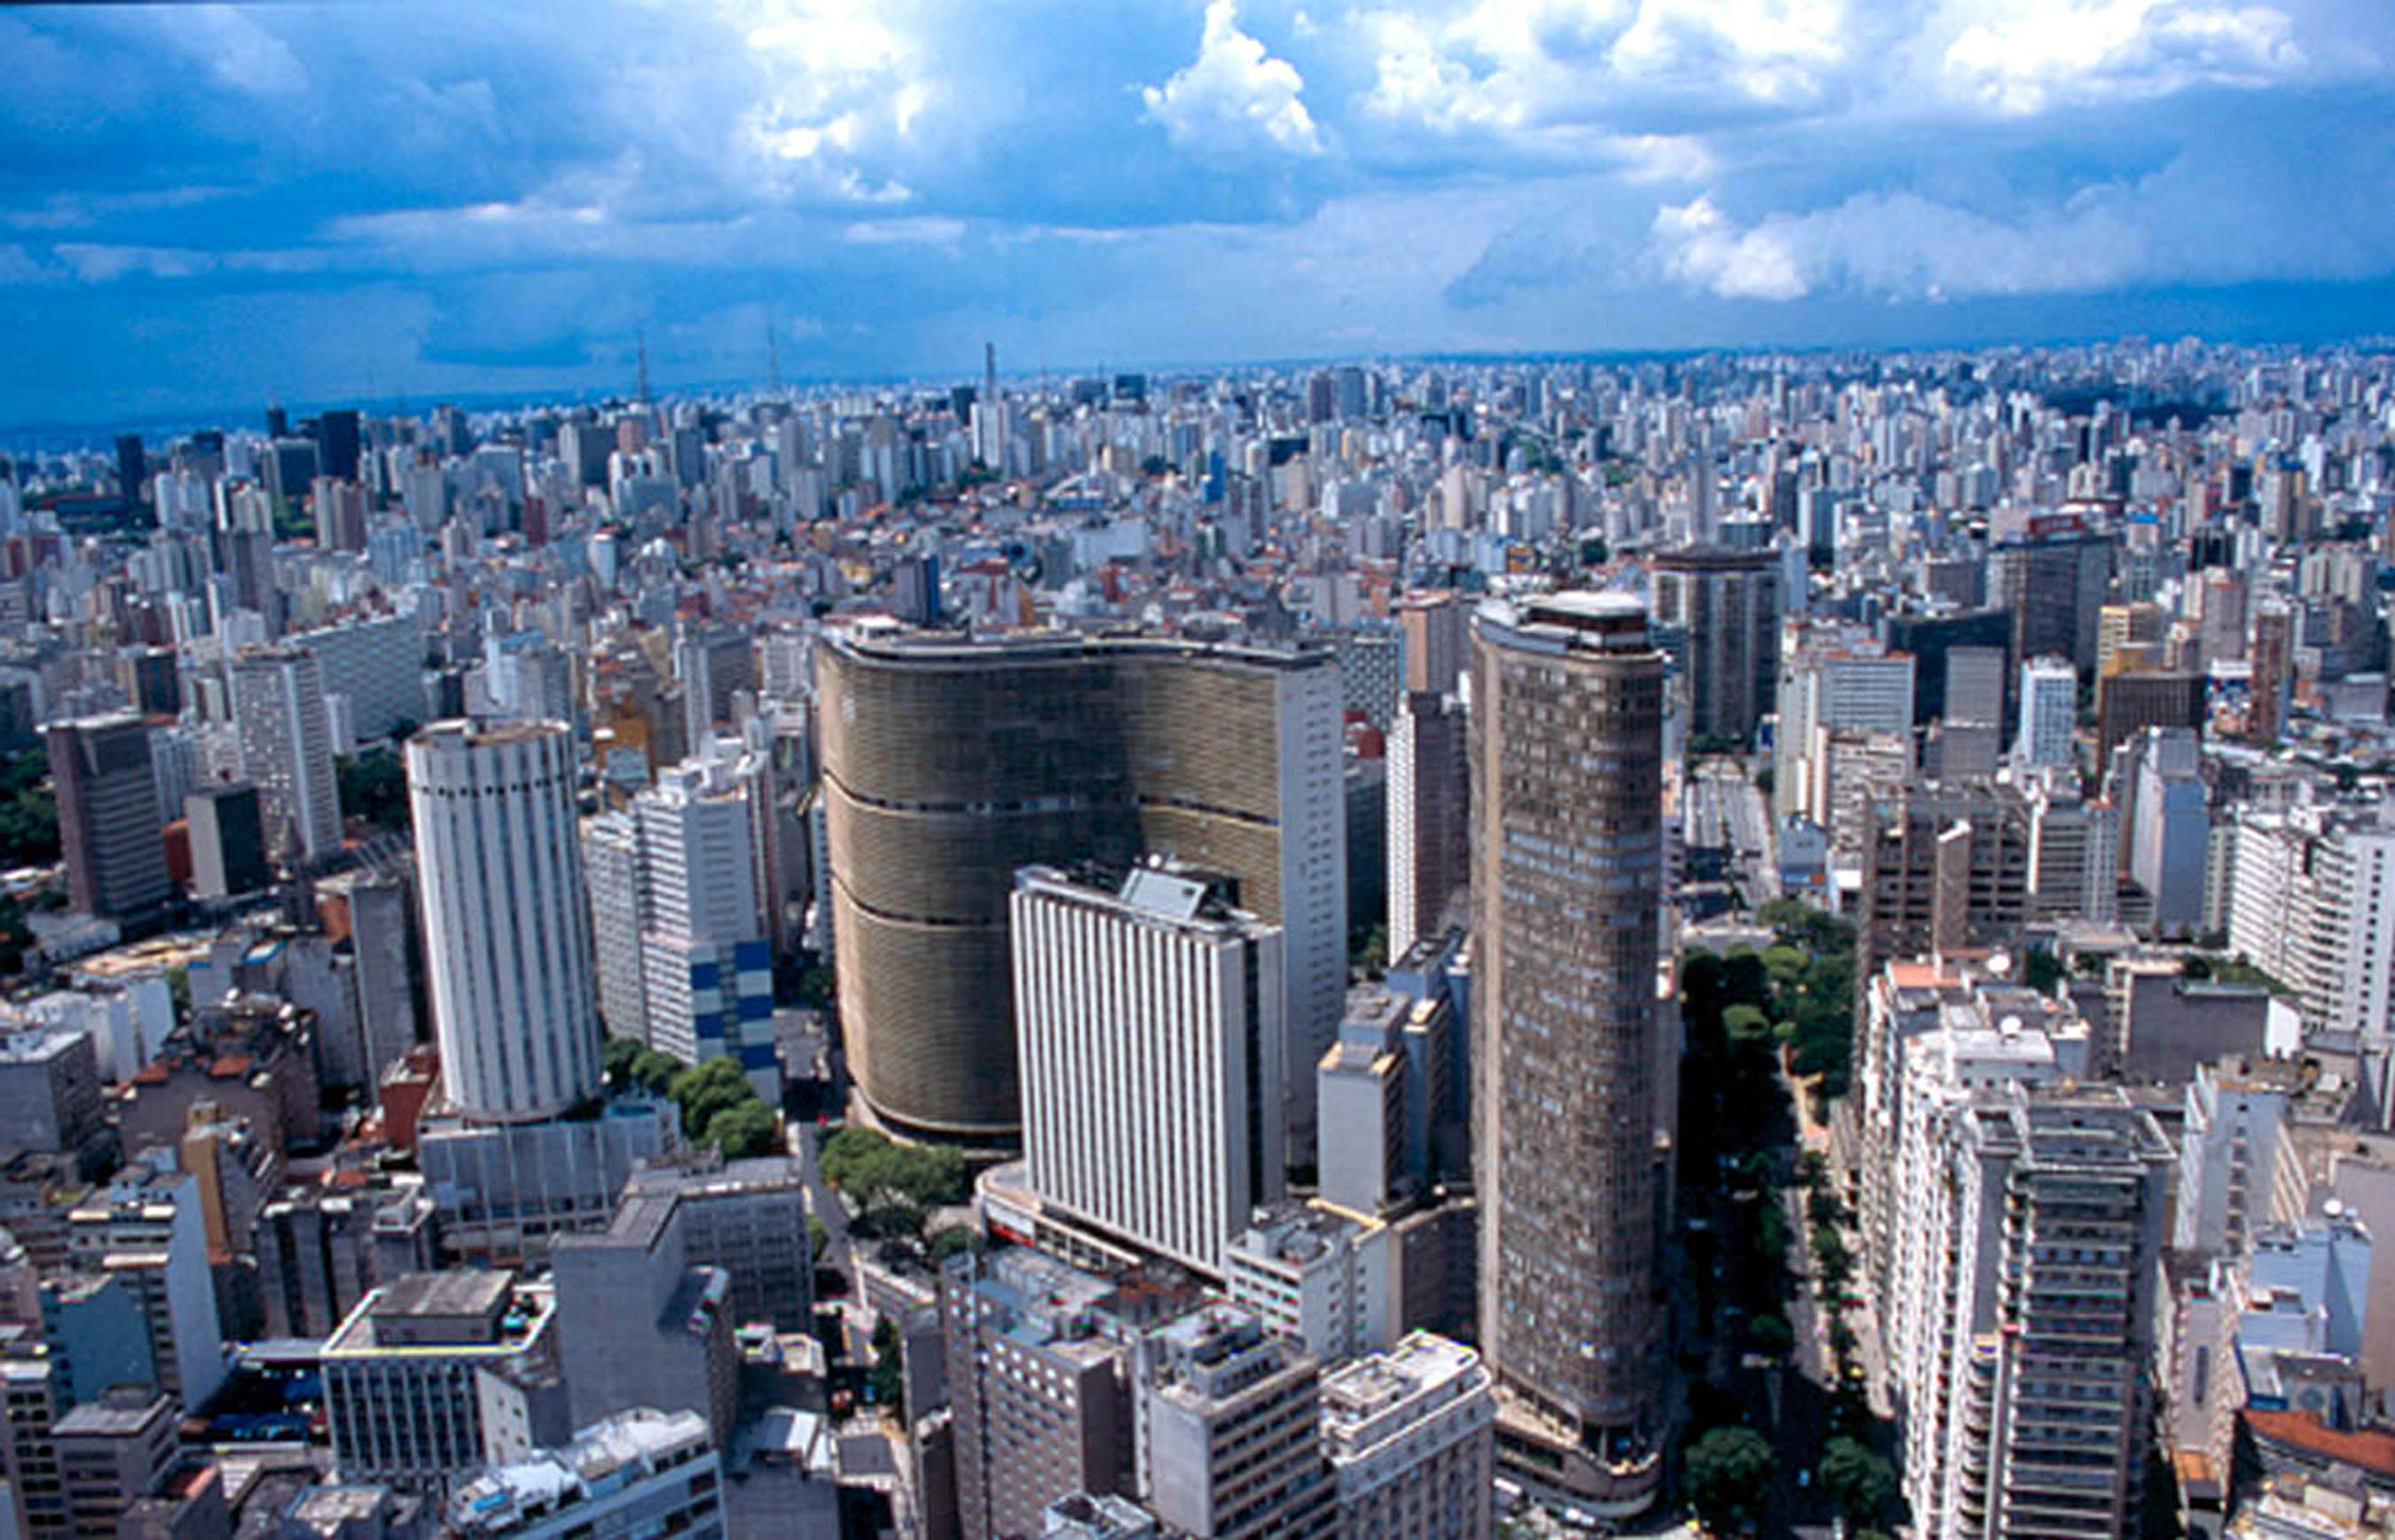 The GDP of Brazil's wealthiest state São Paulo grows 0.4% in 2020